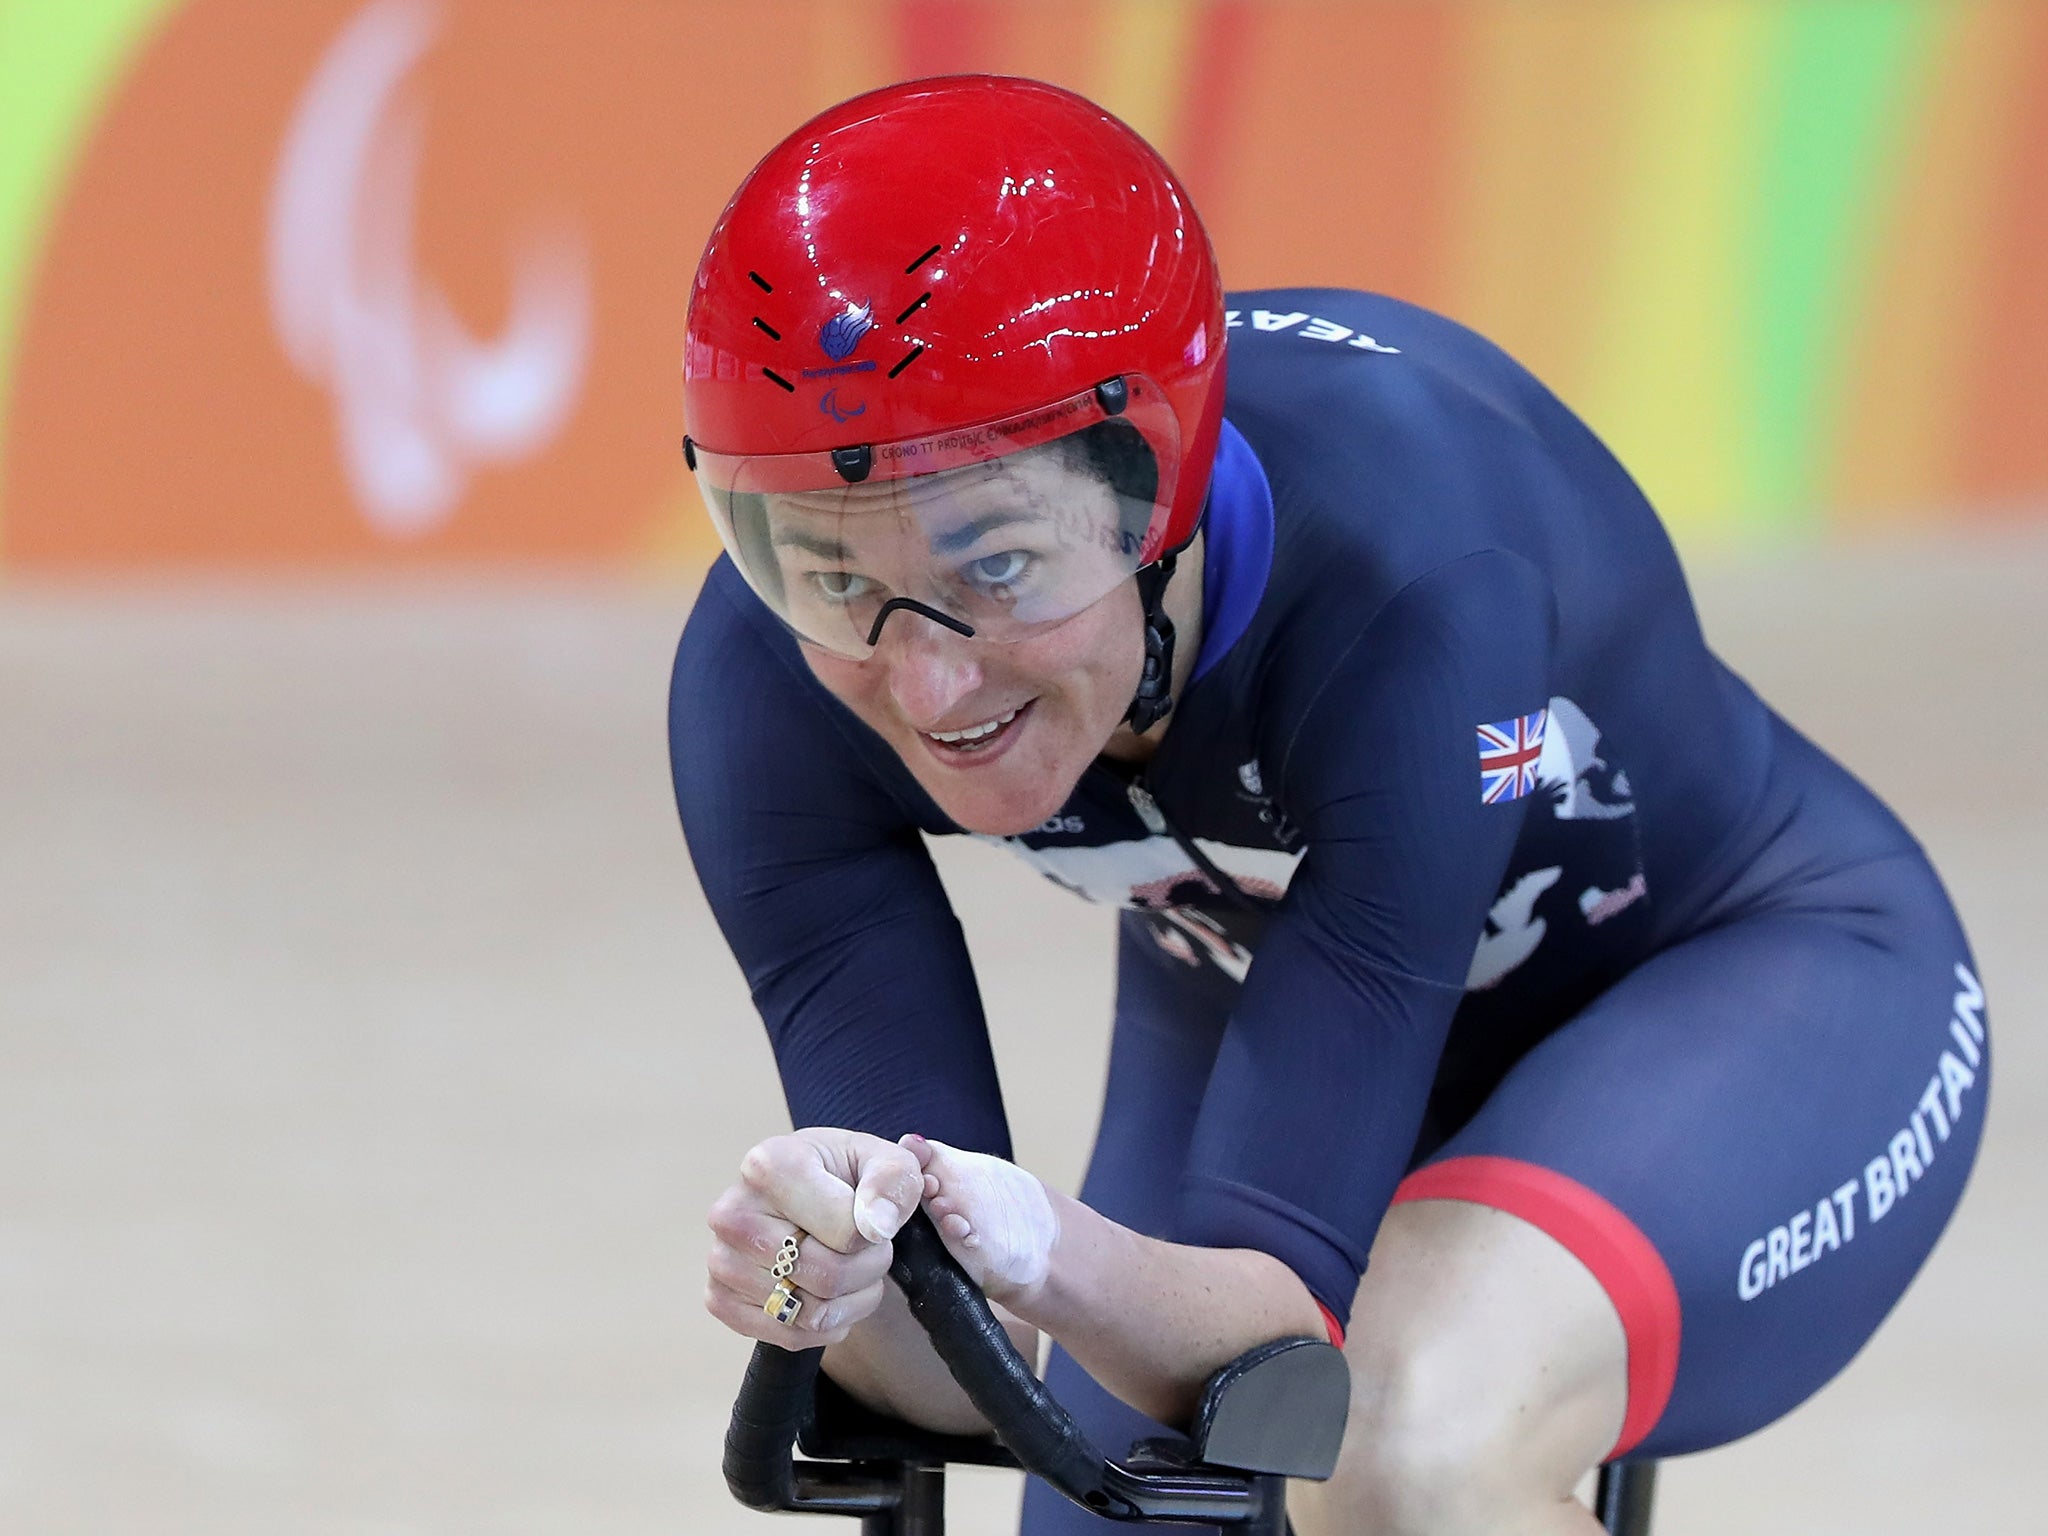 Storey won Britain's 131st medal and 60th gold with a commanding victory